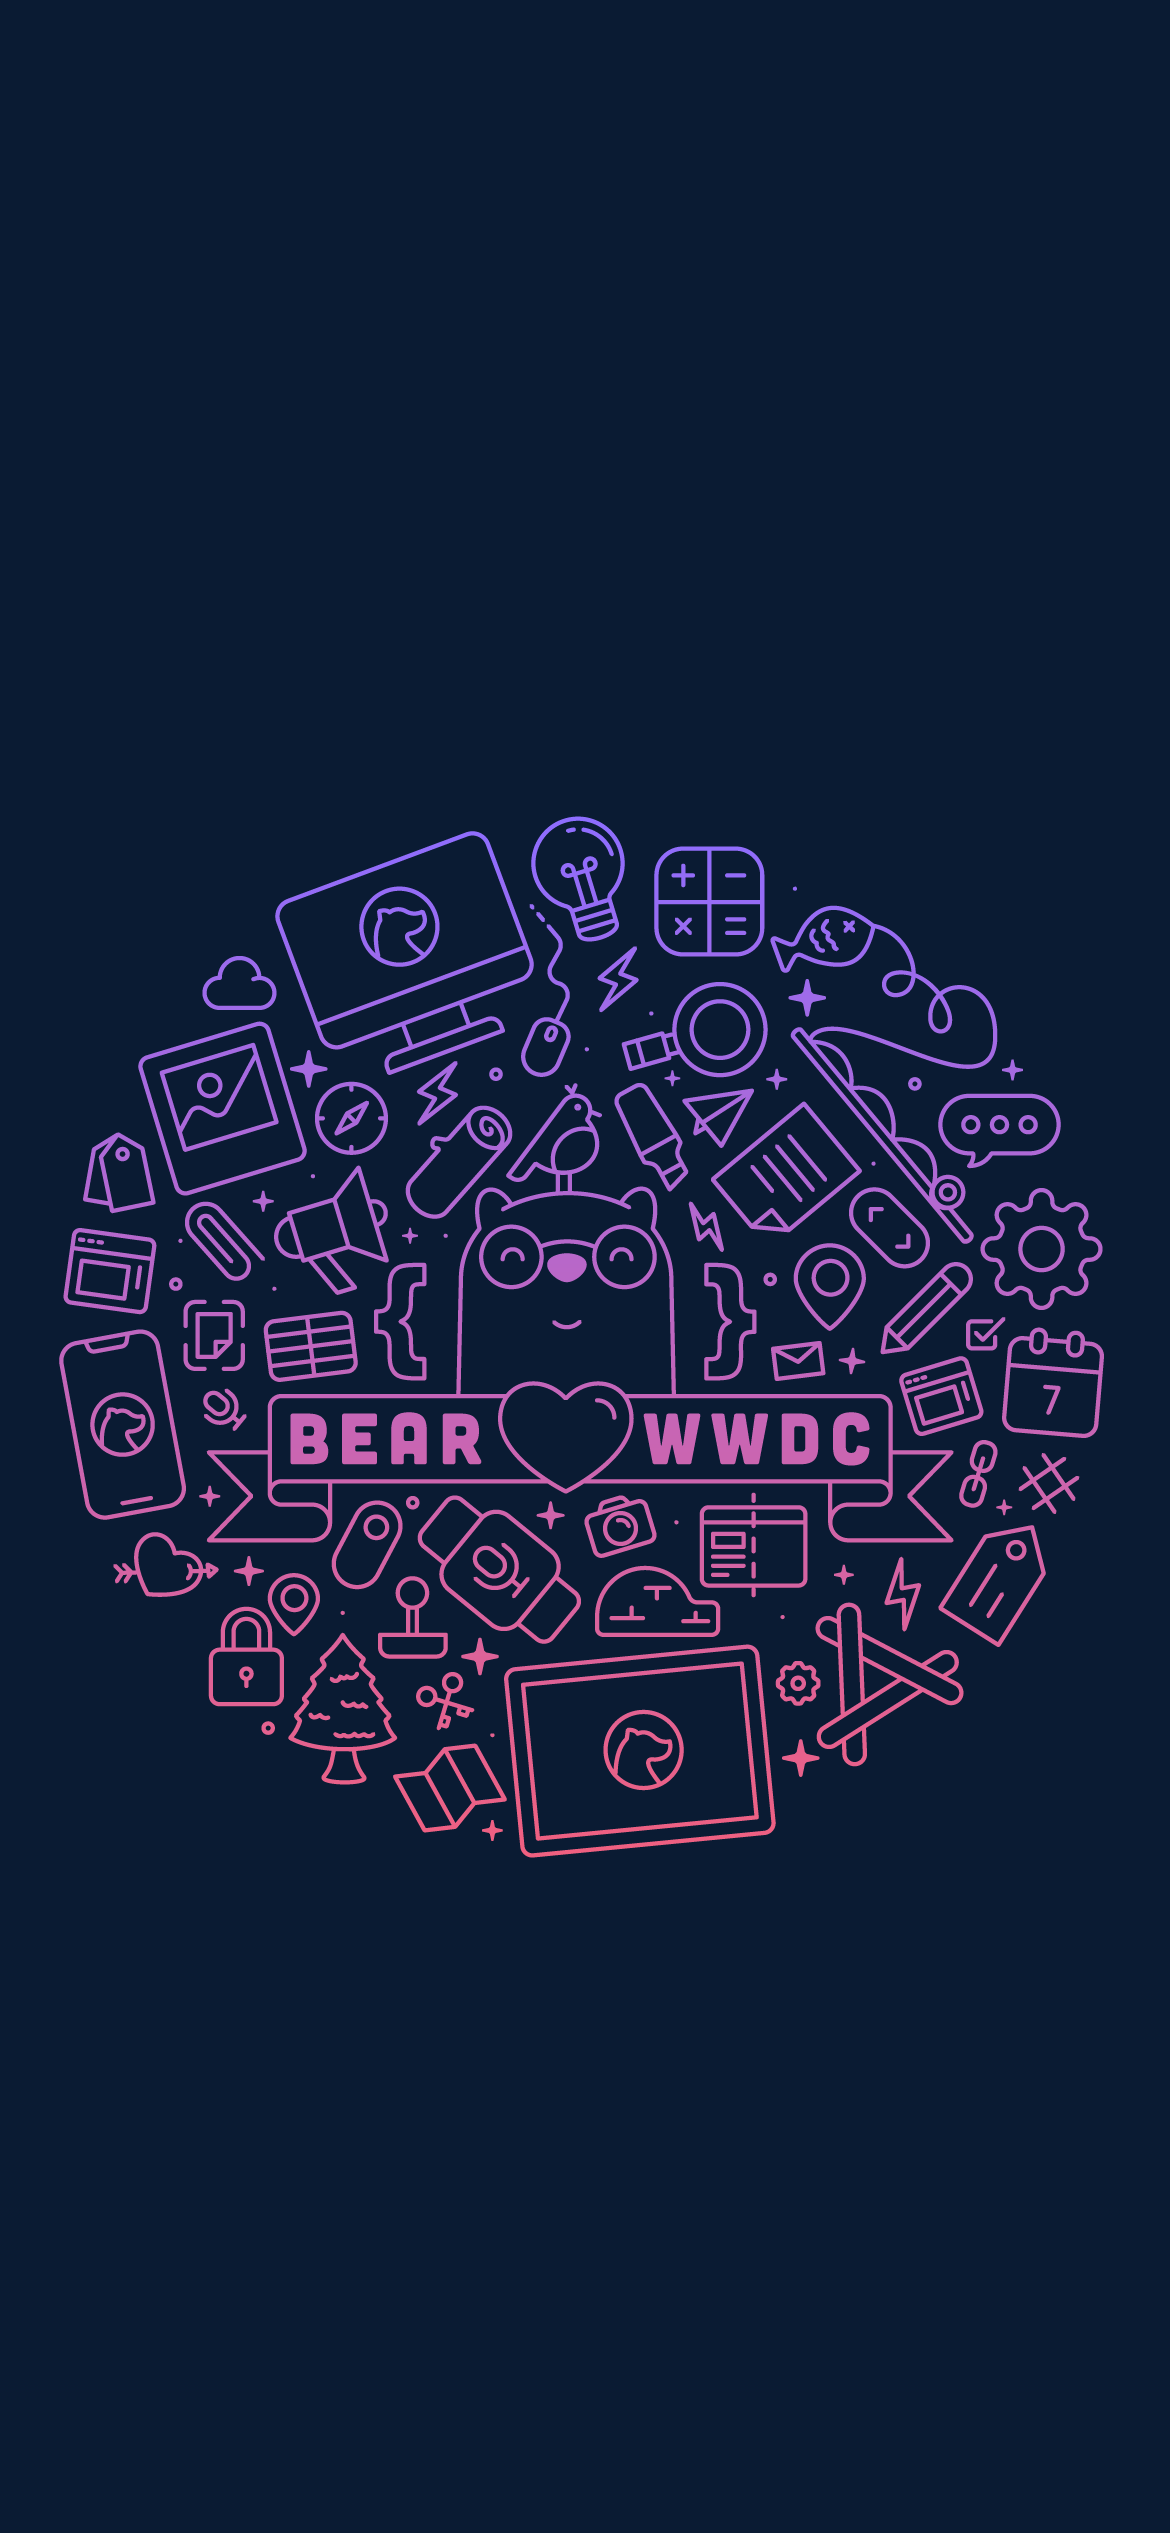 Bear Themed Wallpaper For Your iPhone iPad And Mac App